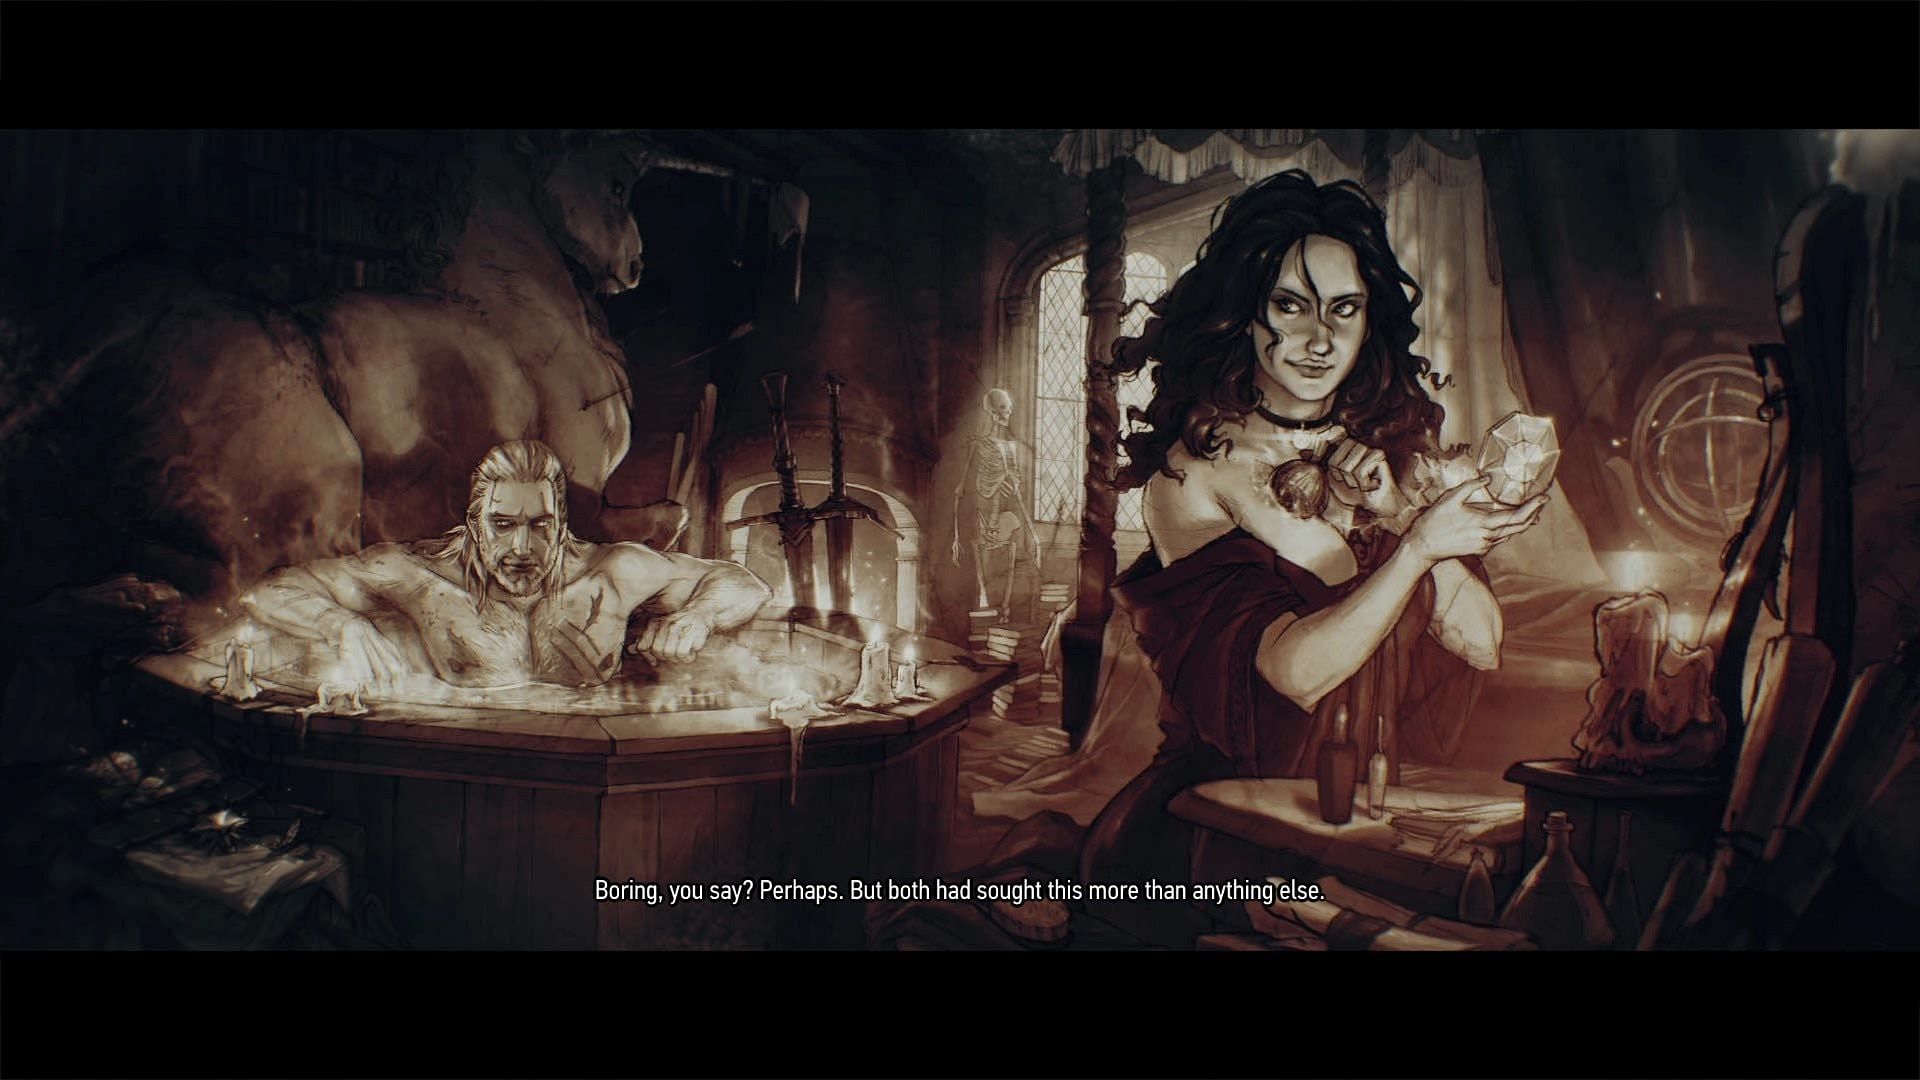 Fun fact: Geralt and Yennefer&#039;s love story was made into a poem called The Wolven Storm by Dandelion which you can hear Priscilla sing during the Novigrad arc of the game (Image via CDPR)